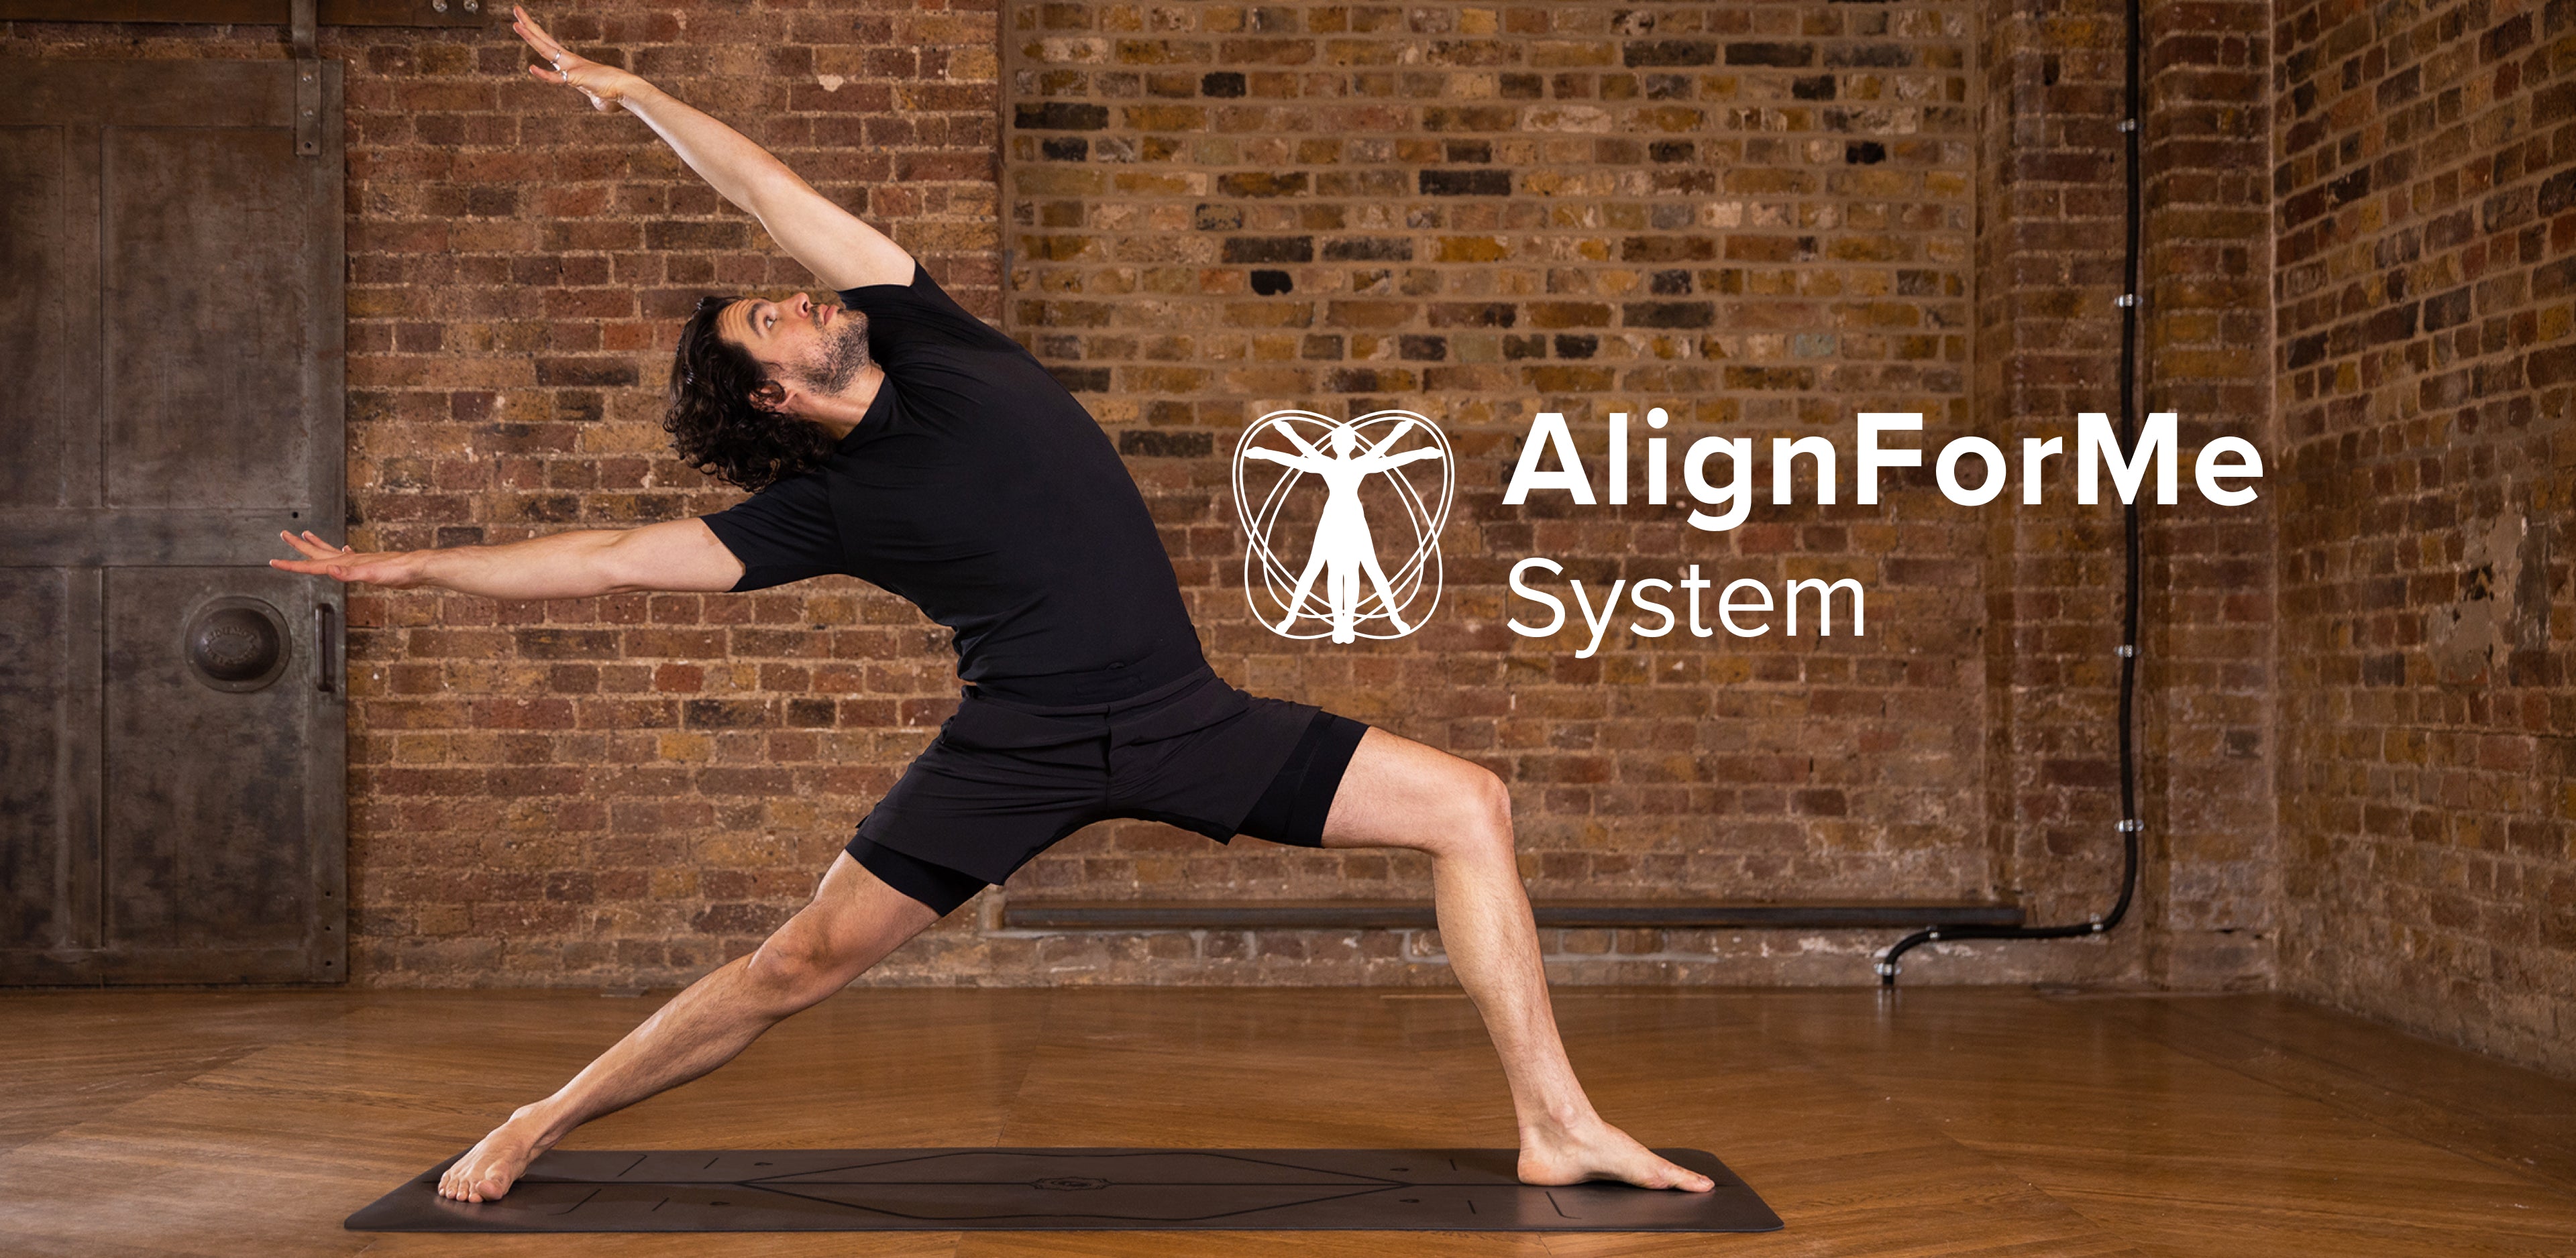 AlignForMe System, Yoga Alignment Instructions